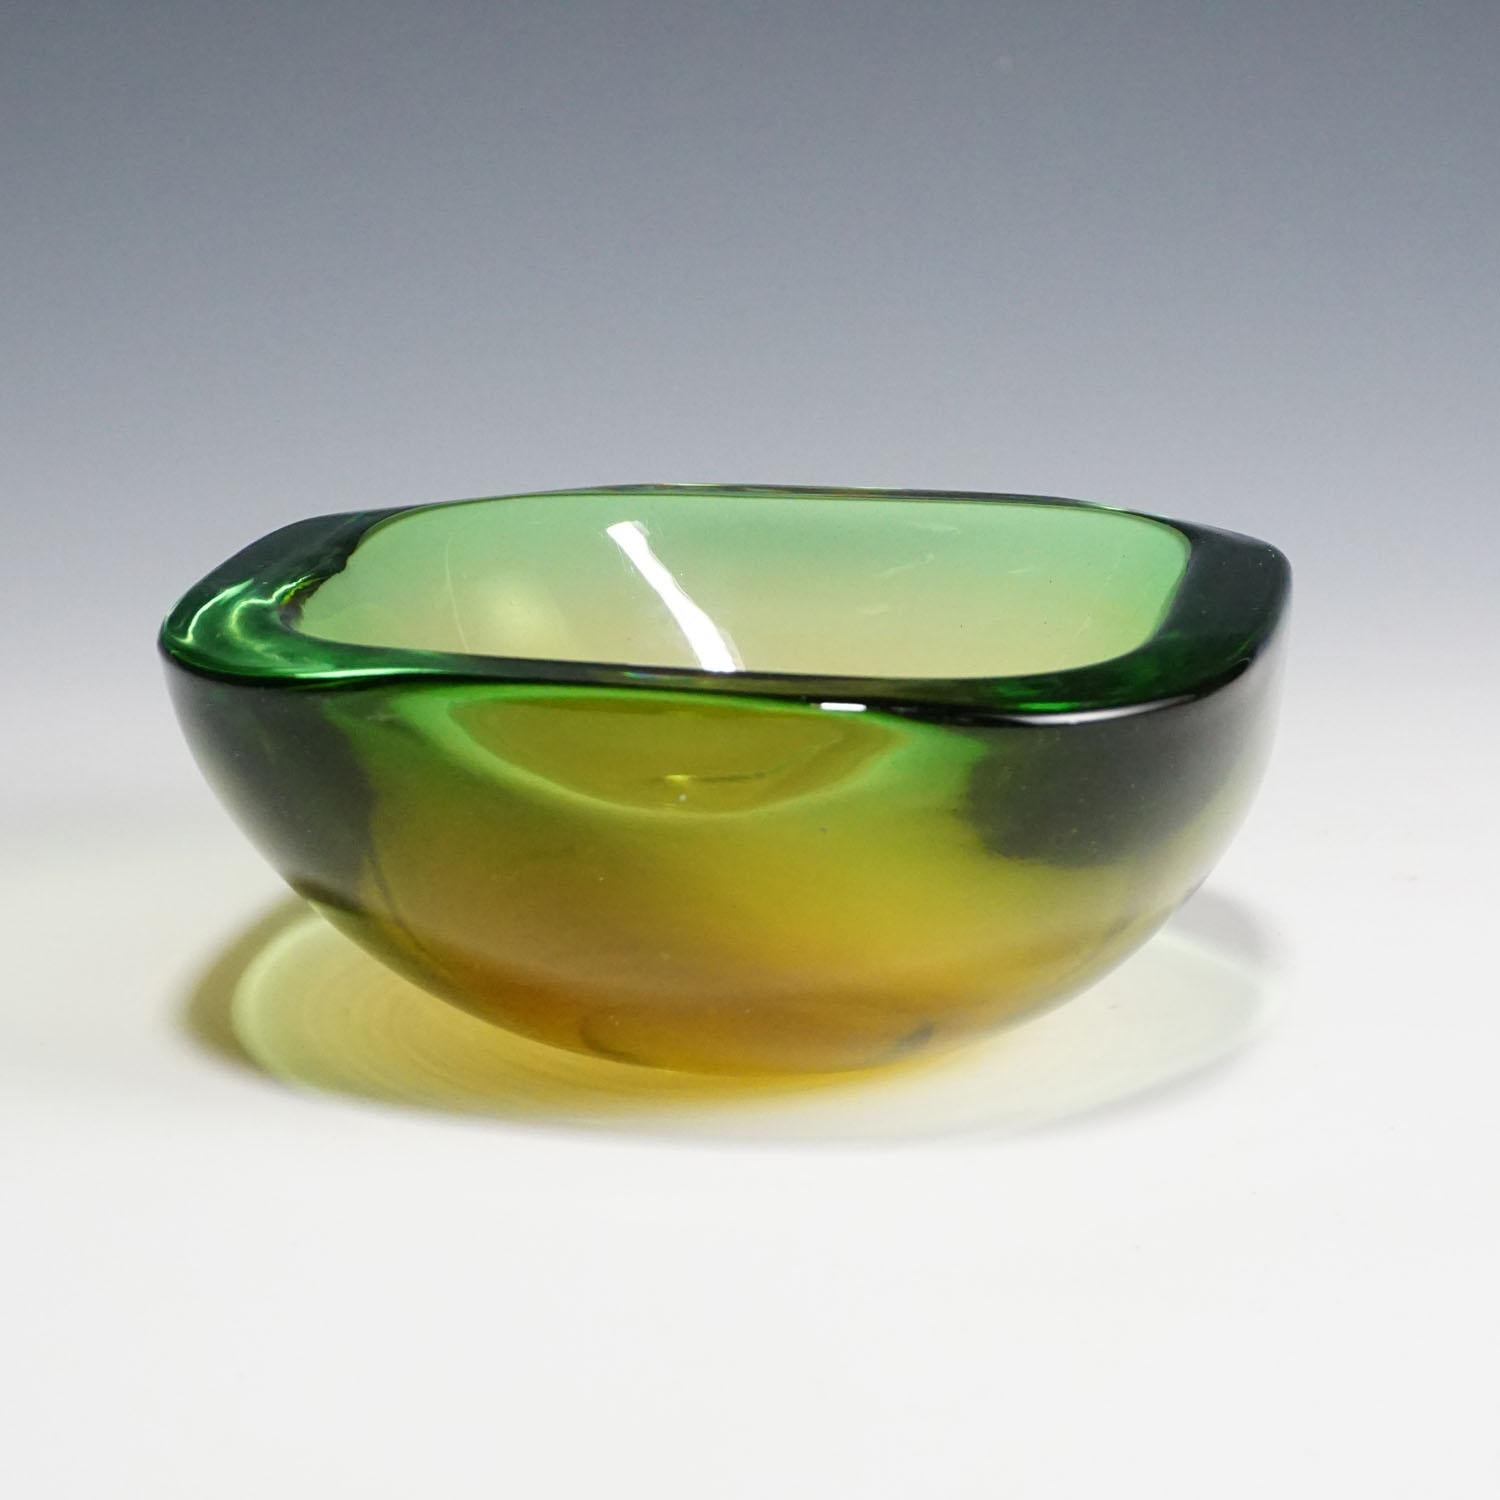 A heavy sommerso glass bowl attributed to Vetreria Gino Cenedese, circa 1960. An inspiring mixture of yellow, green and clear glass.
Measures:
Width: 5.71